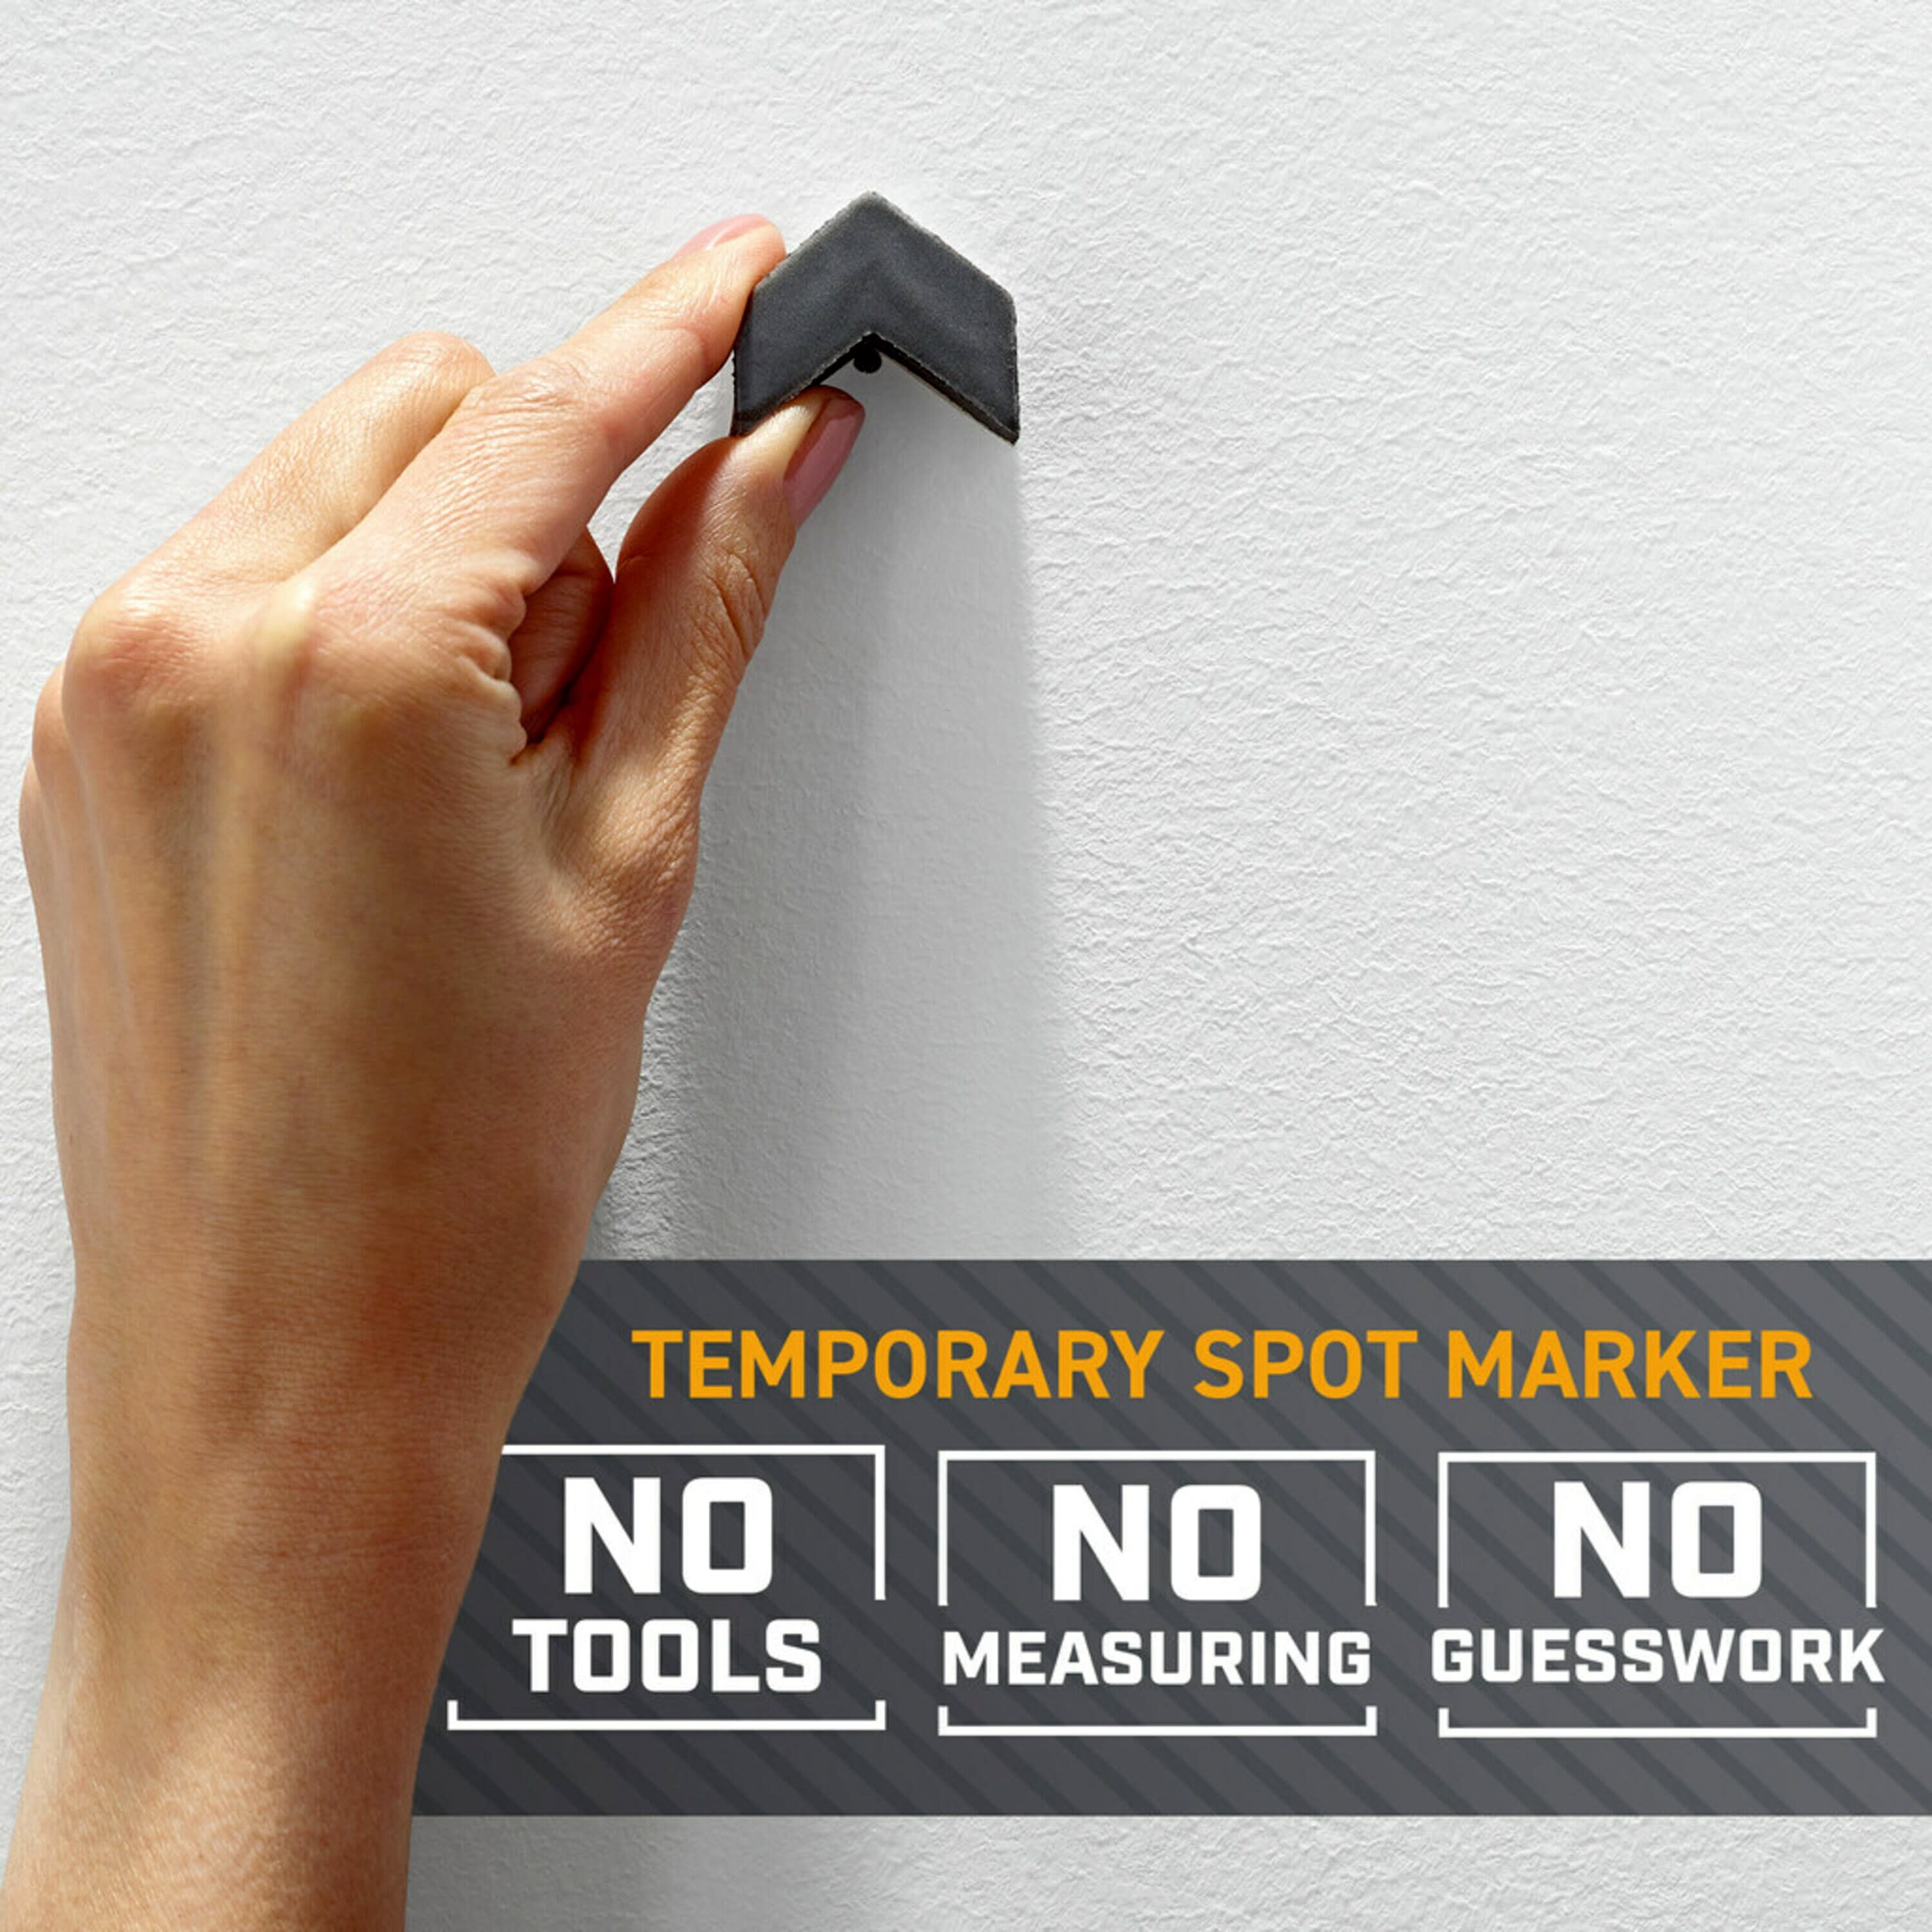 3M CLAW Drywall Picture Hanger with Temporary Spot Marker, holds